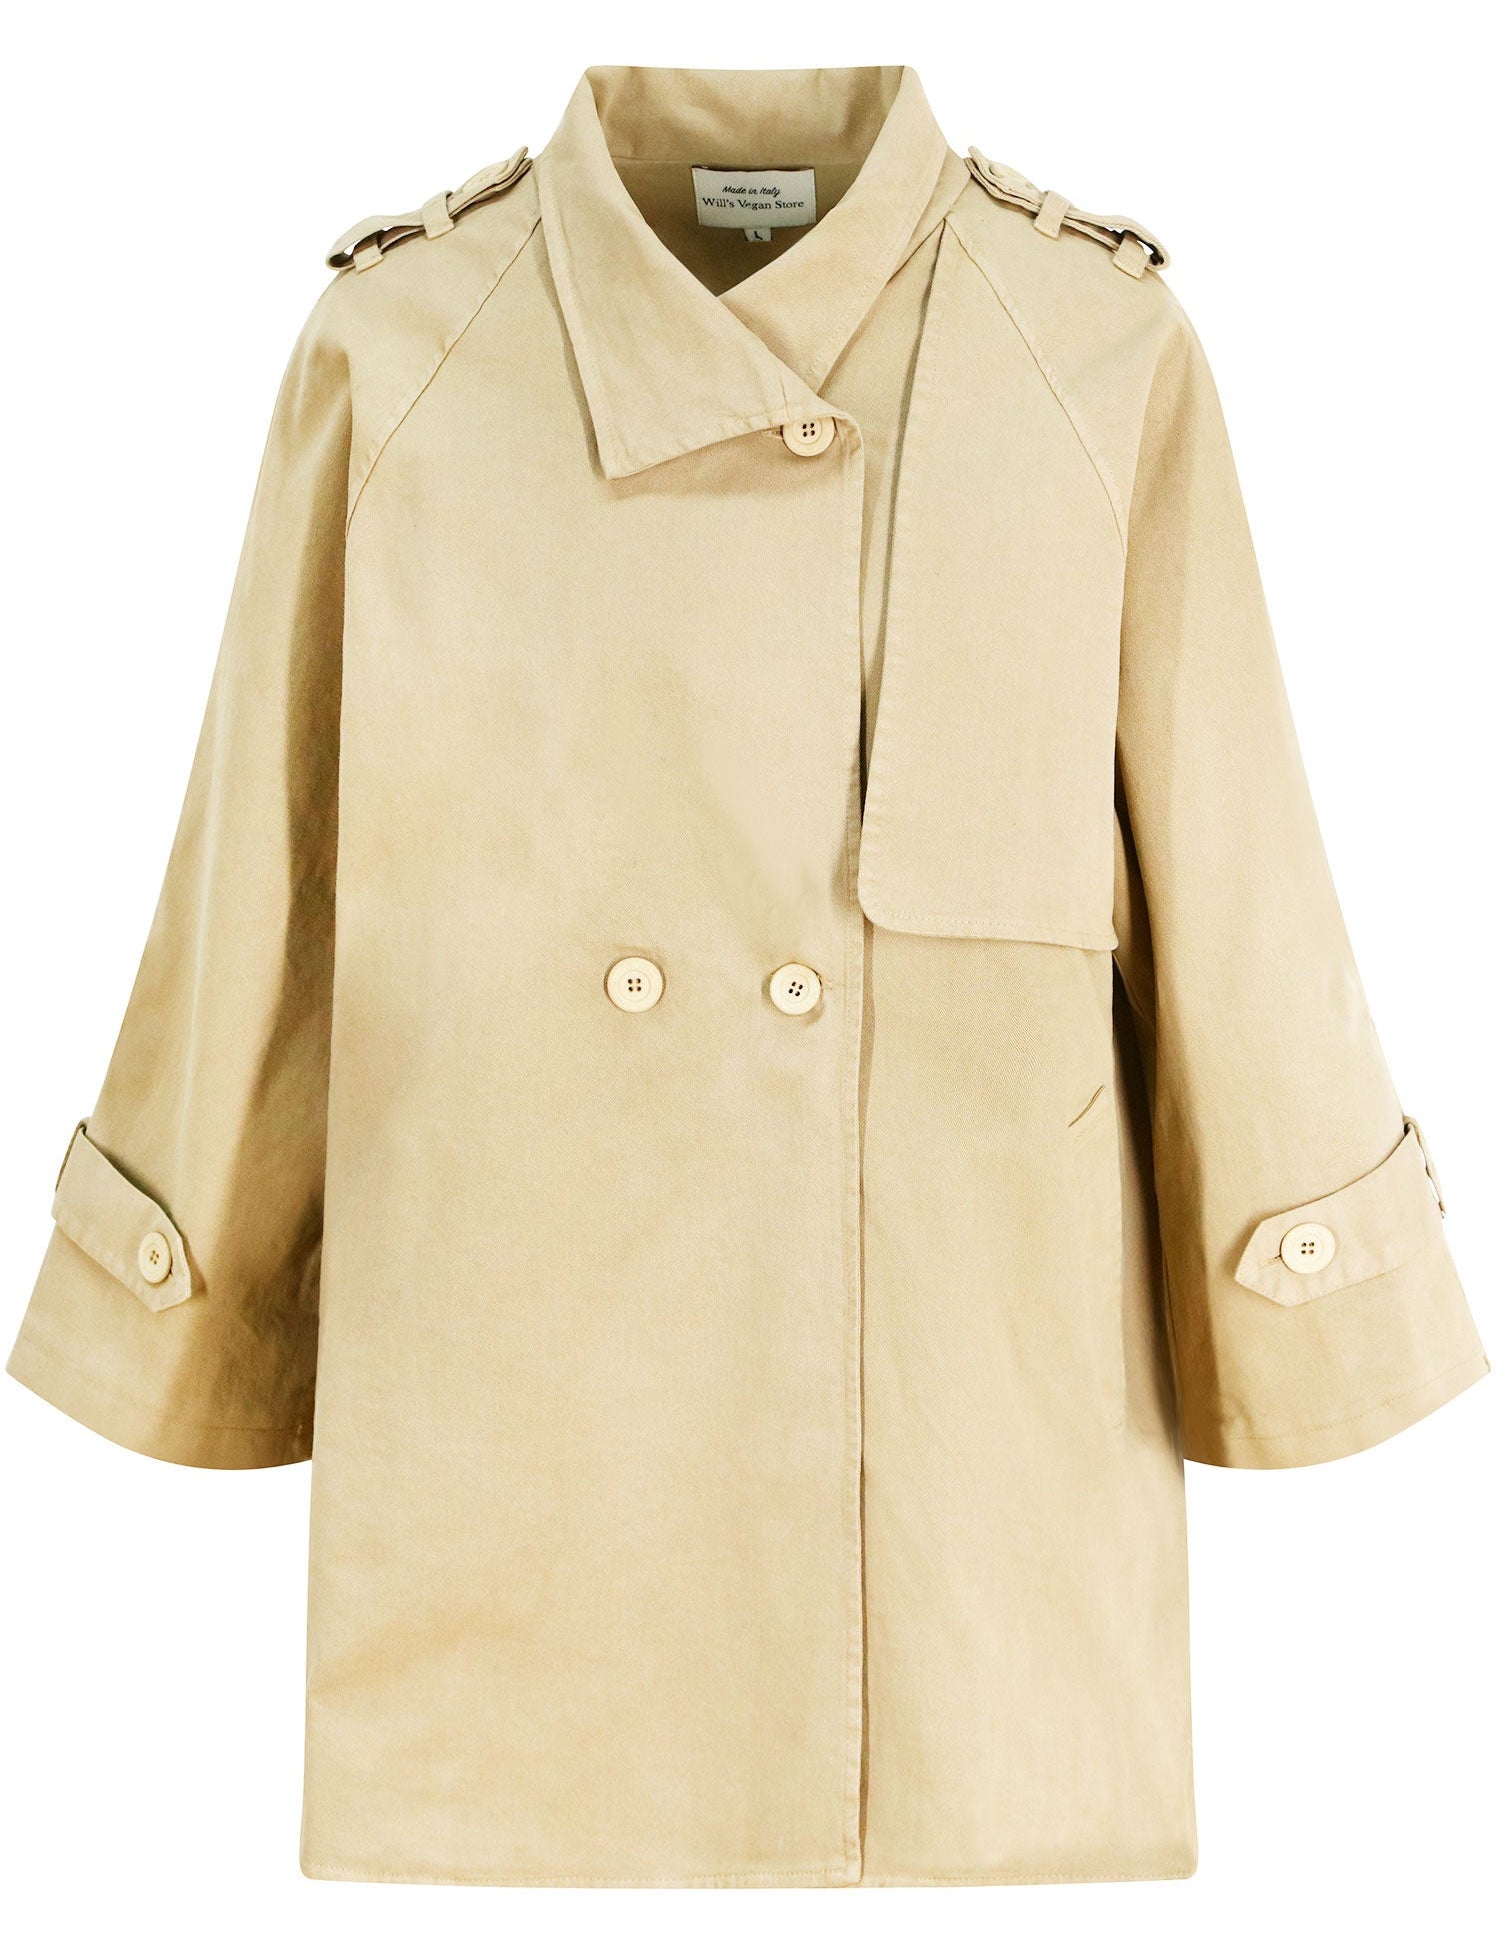 Phototemplate.psd_0022_continental-parka-front.jpg